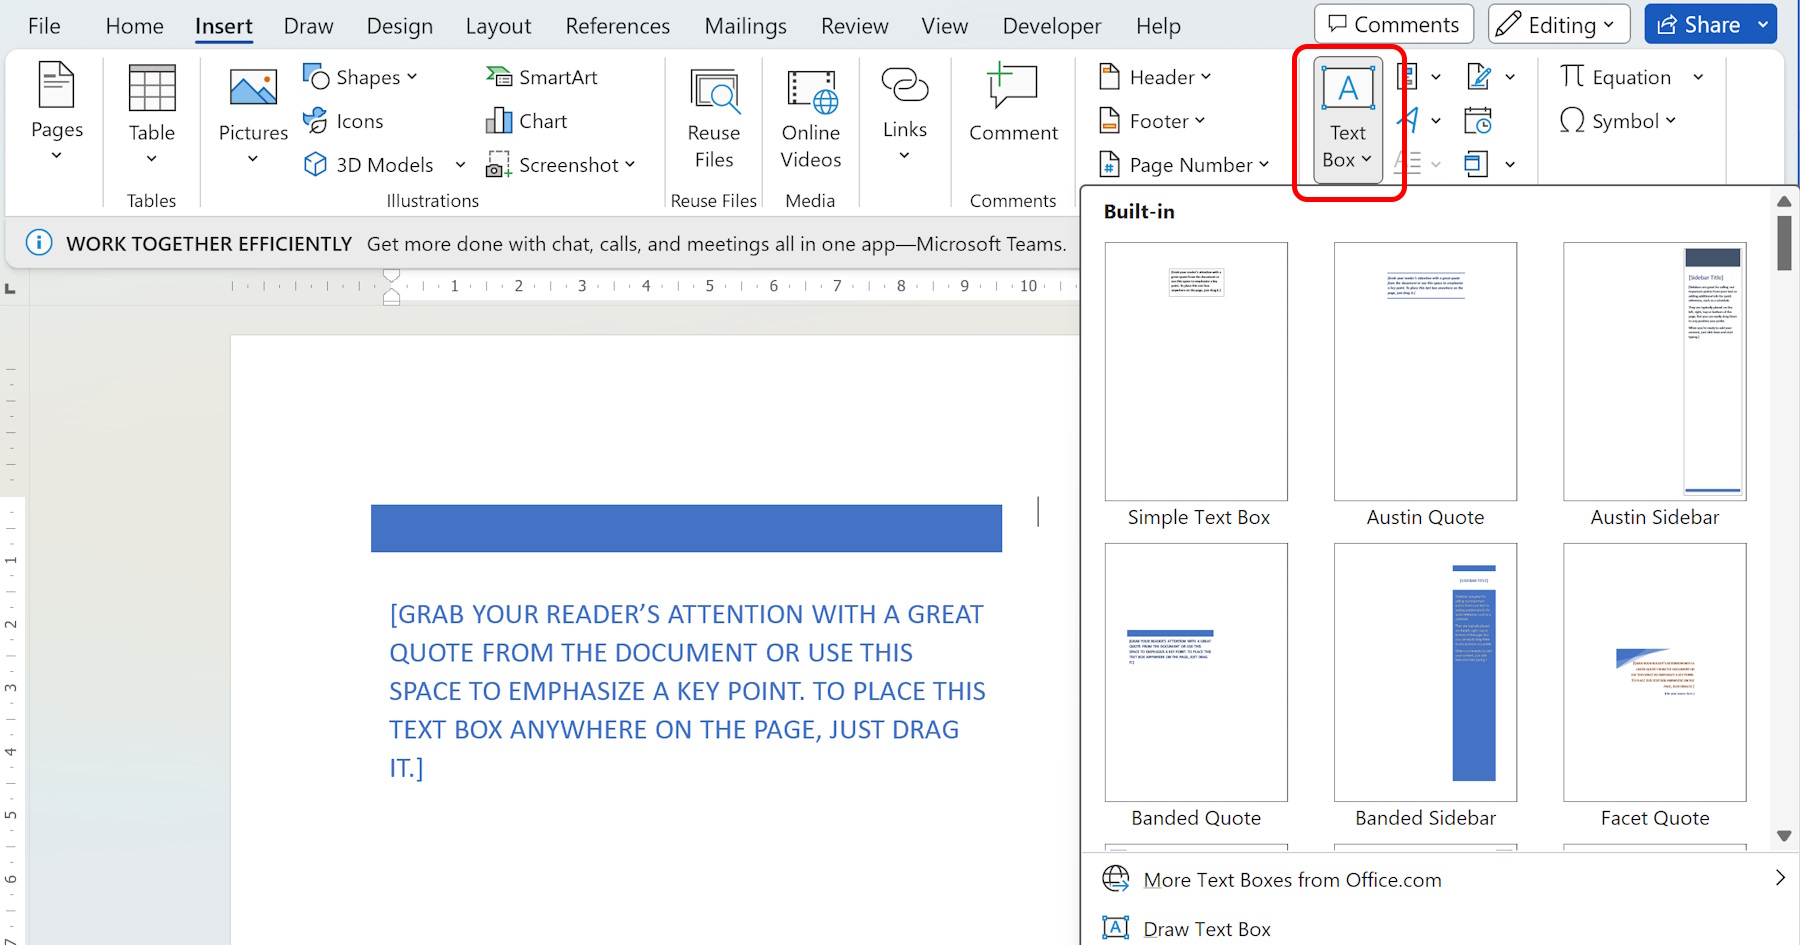 Learn how to add a text box in Word and customize it with these tips and tricks. Enhance the appearance and functionality of your Word documents by adding and formatting text boxes.